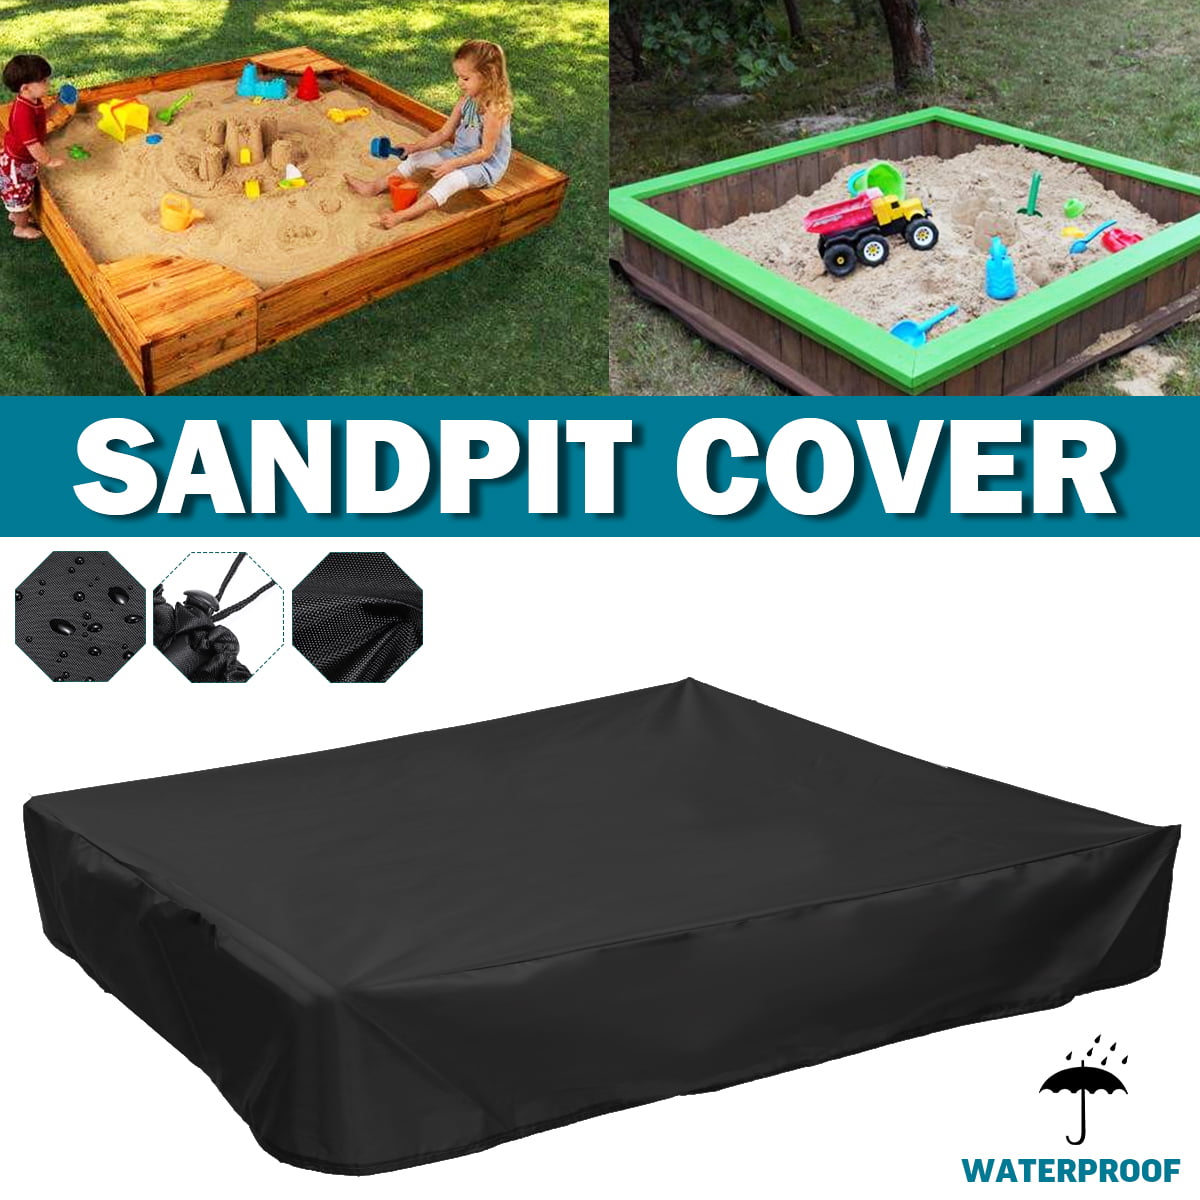 120X120cm Sandbox Cover with Drawstring Beach Sandbox Canopy Cover for Kids Toy Protection Outdoor Garden Sandbox Cover Waterproof Green Square Dustproof Polyester Sandpit Sandbox Cover 